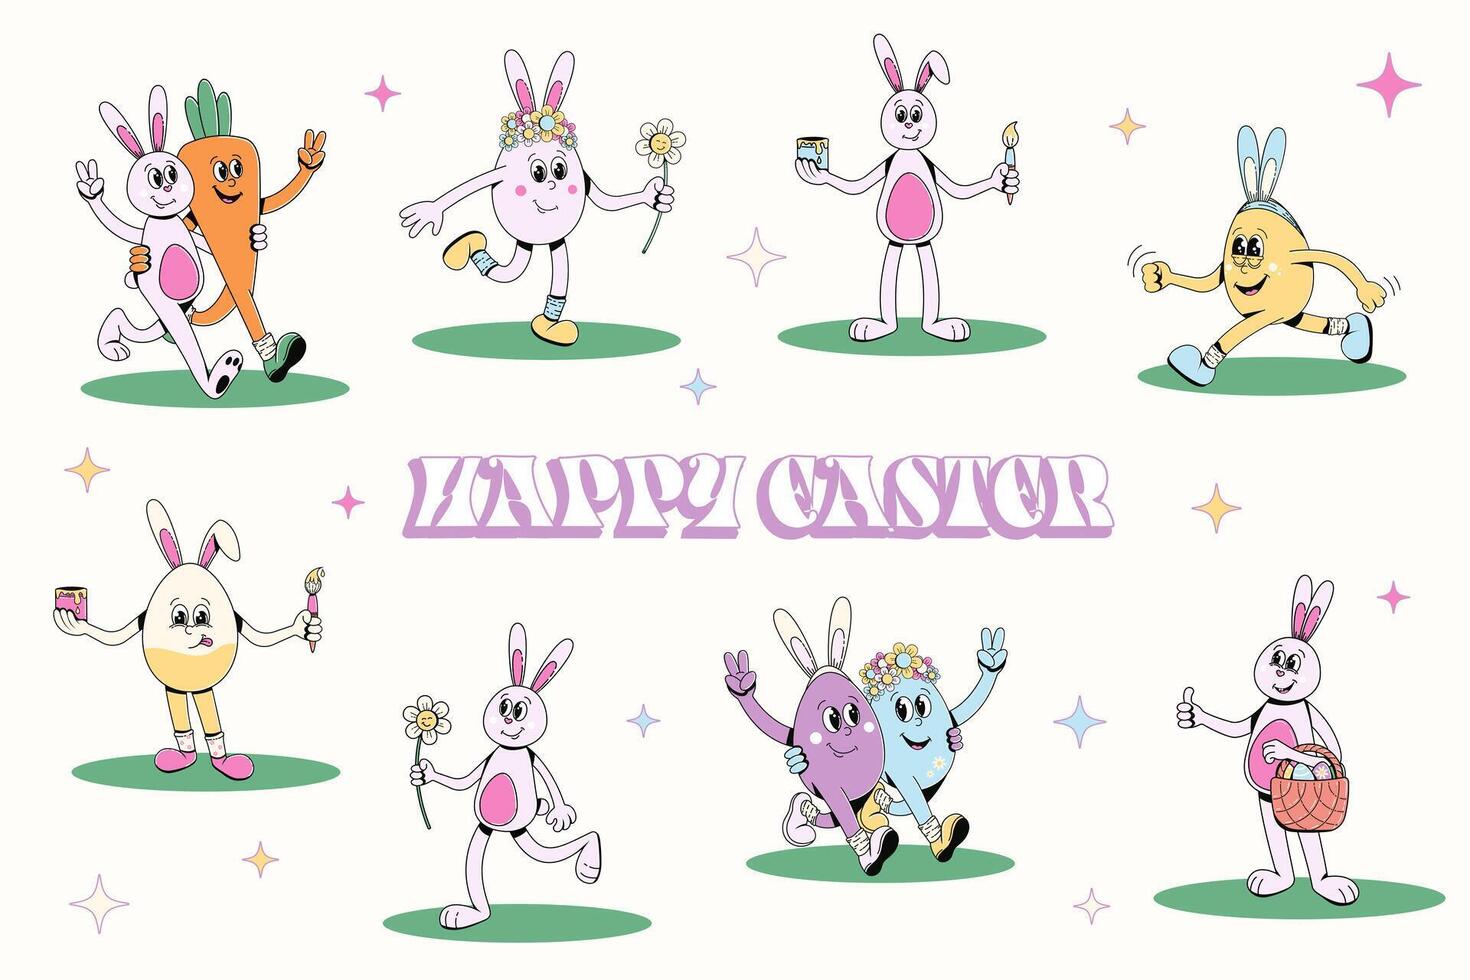 Retro groovy Easter set. Easter bunny and Easter egg characters in trendy hippie cartoon 60s 70s style. Flat vector hand drawn illustration set.